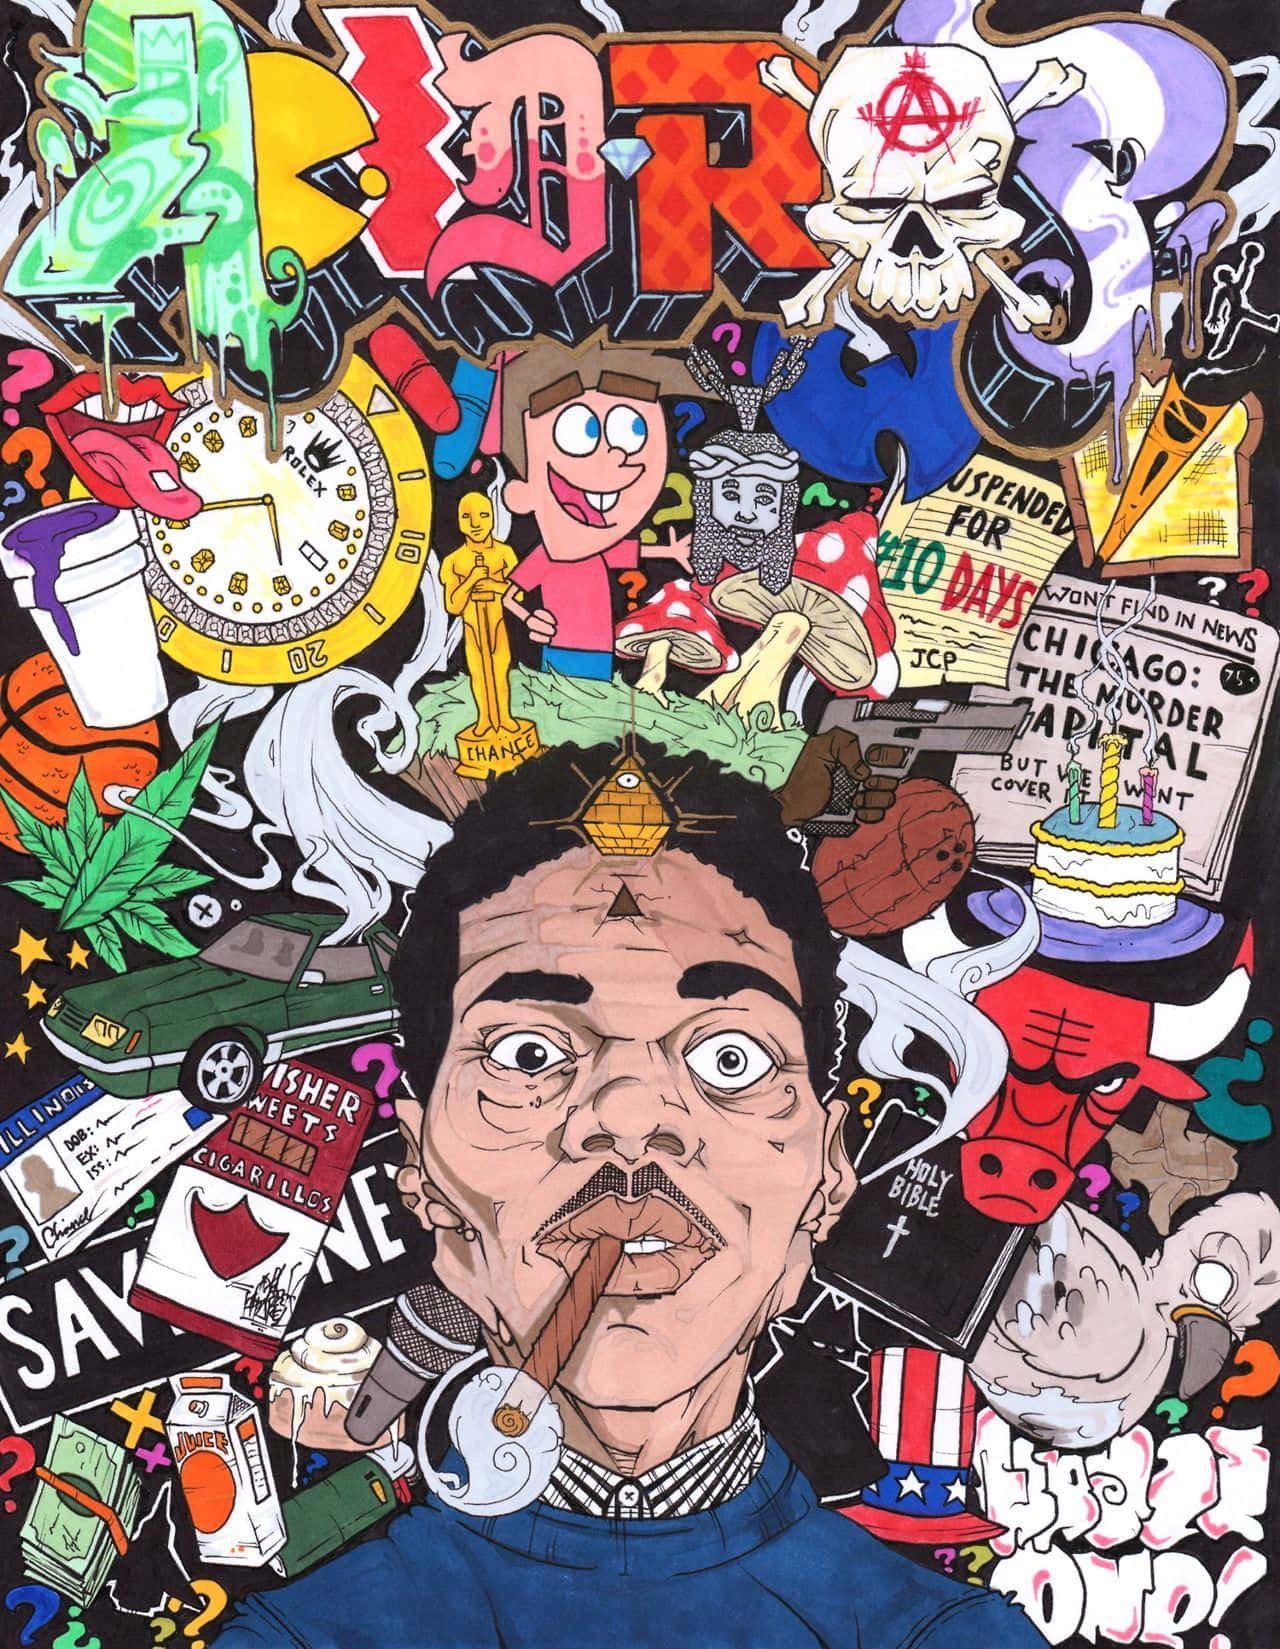 Chance the Rapper drawing surrounded by his album covers and other things he's been in. - Chance the Rapper